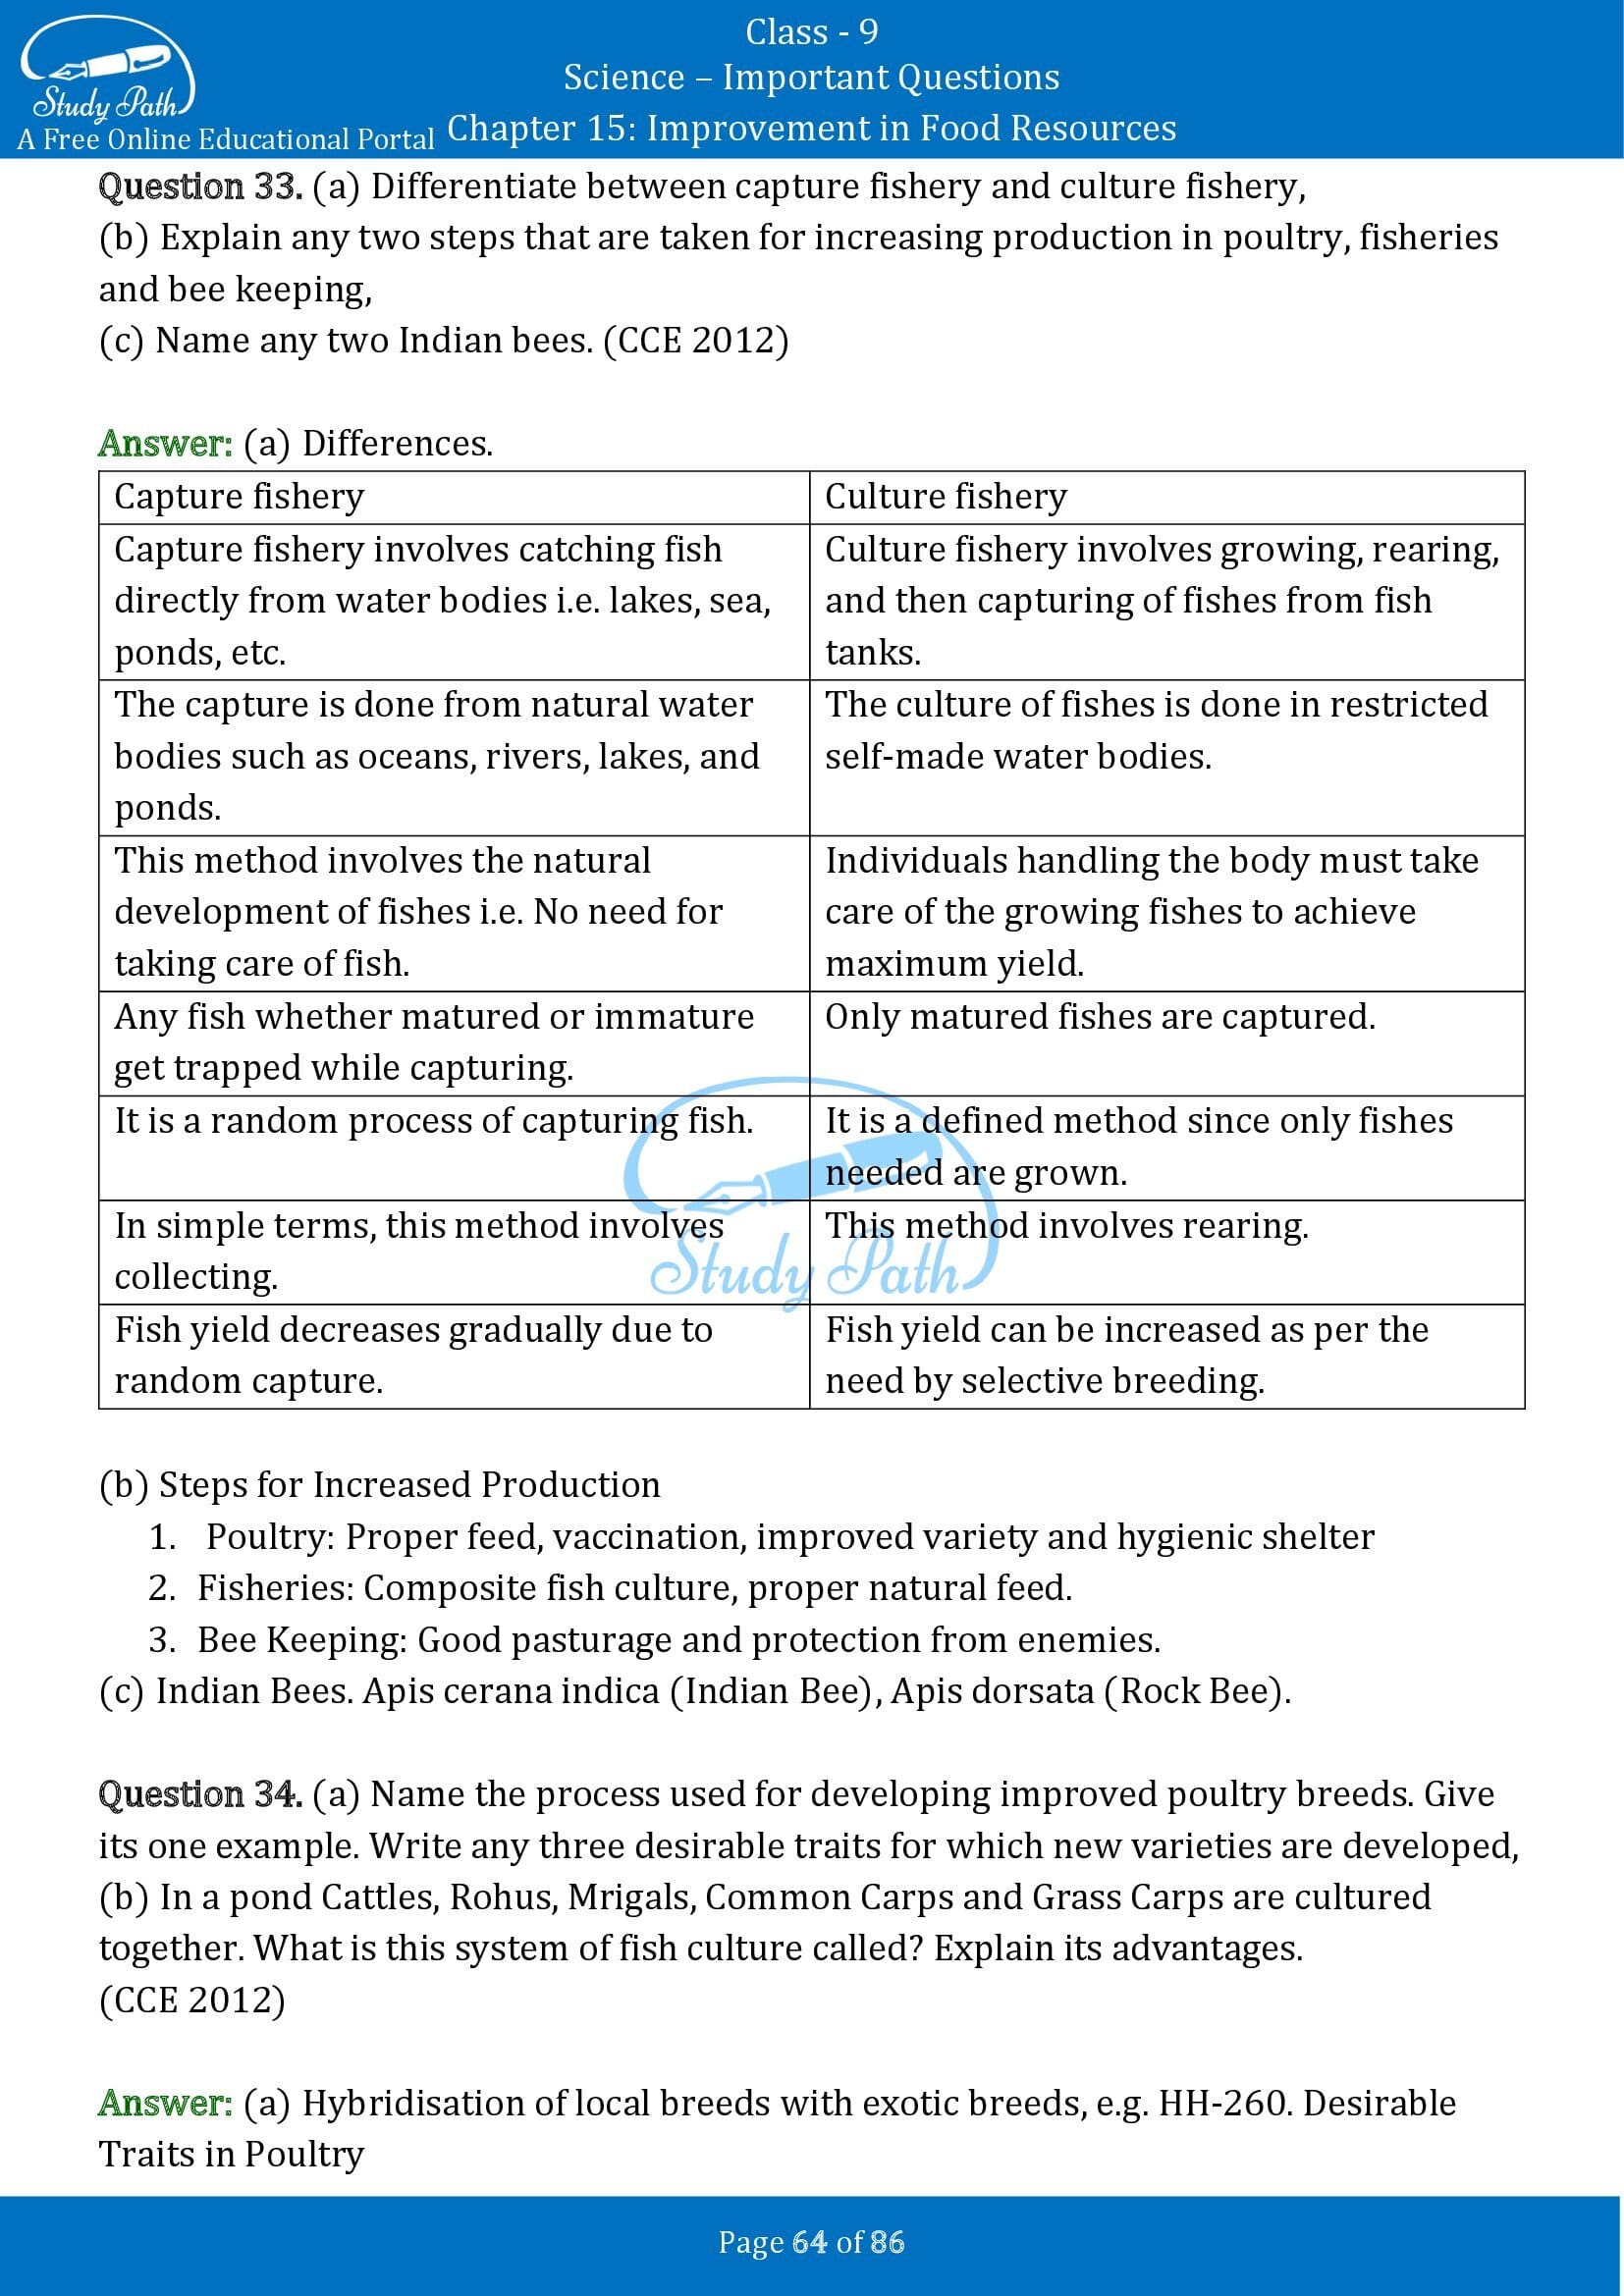 Important Questions for Class 9 Science Chapter 15 Improvement in Food Resources 00064